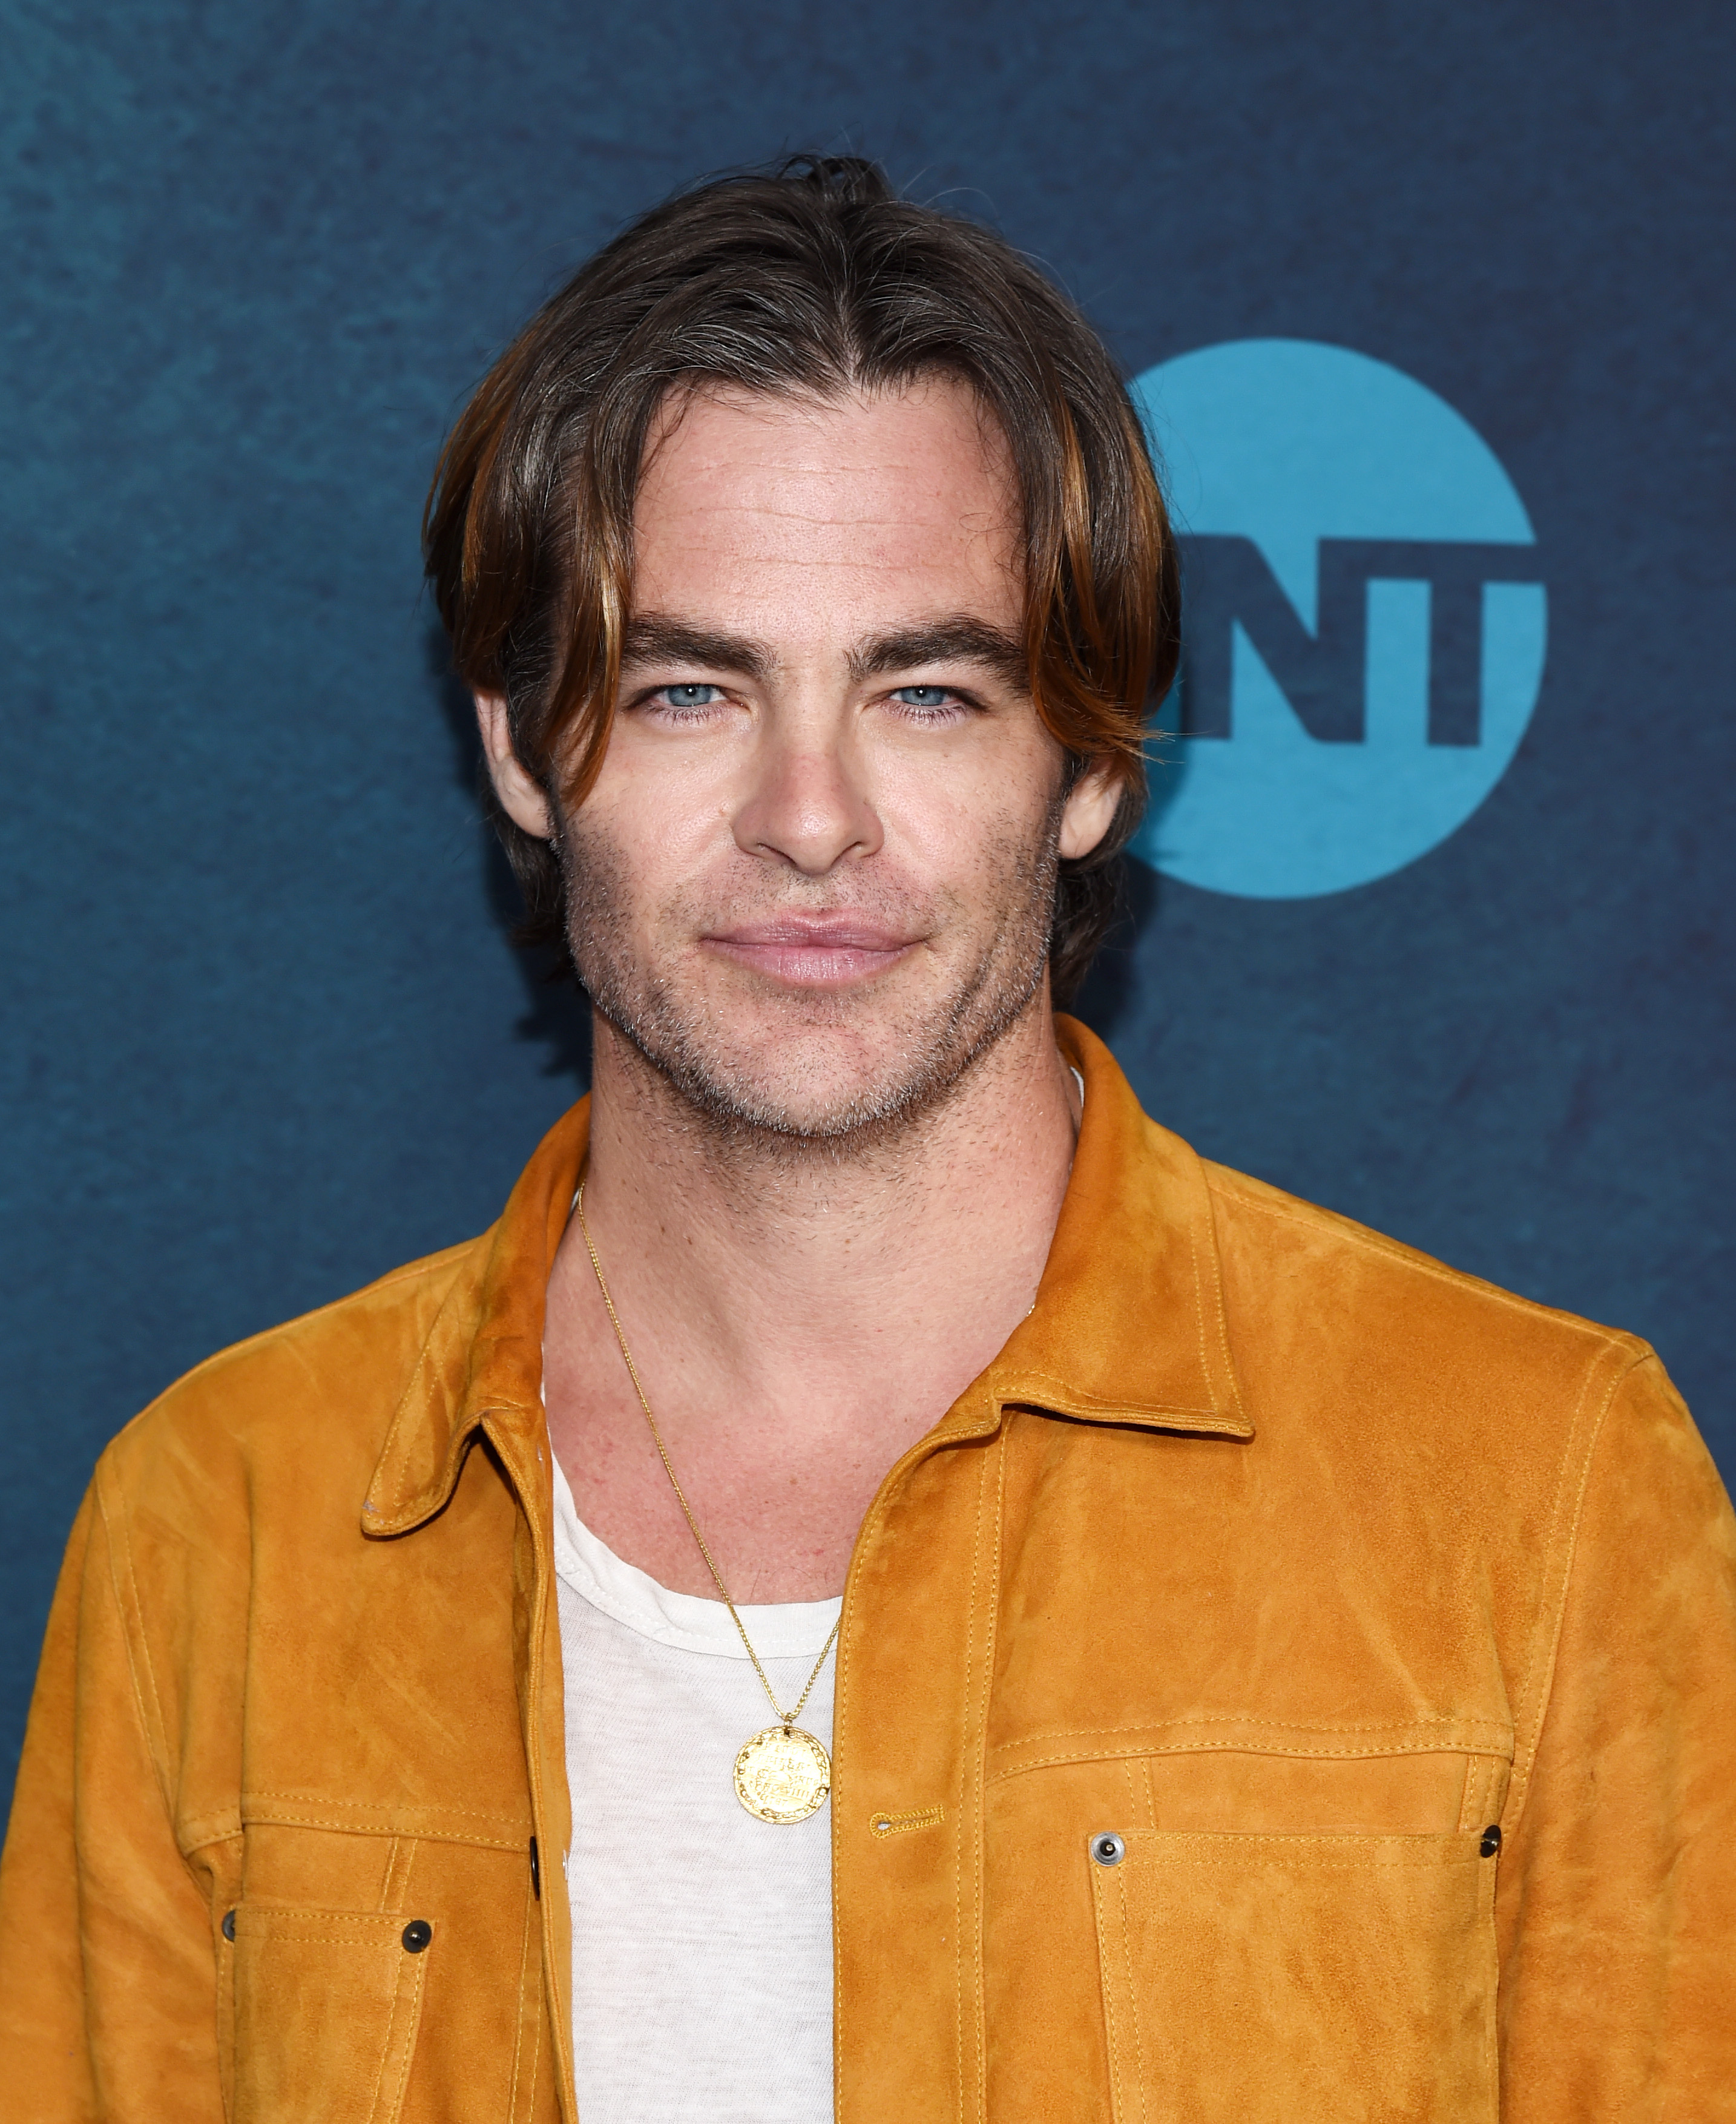 Chris Pine at TNT's "I Am The Night" EMMY For Your Consideration Event on May 9, 2019 in Los Angeles, California. | Source: Getty Images